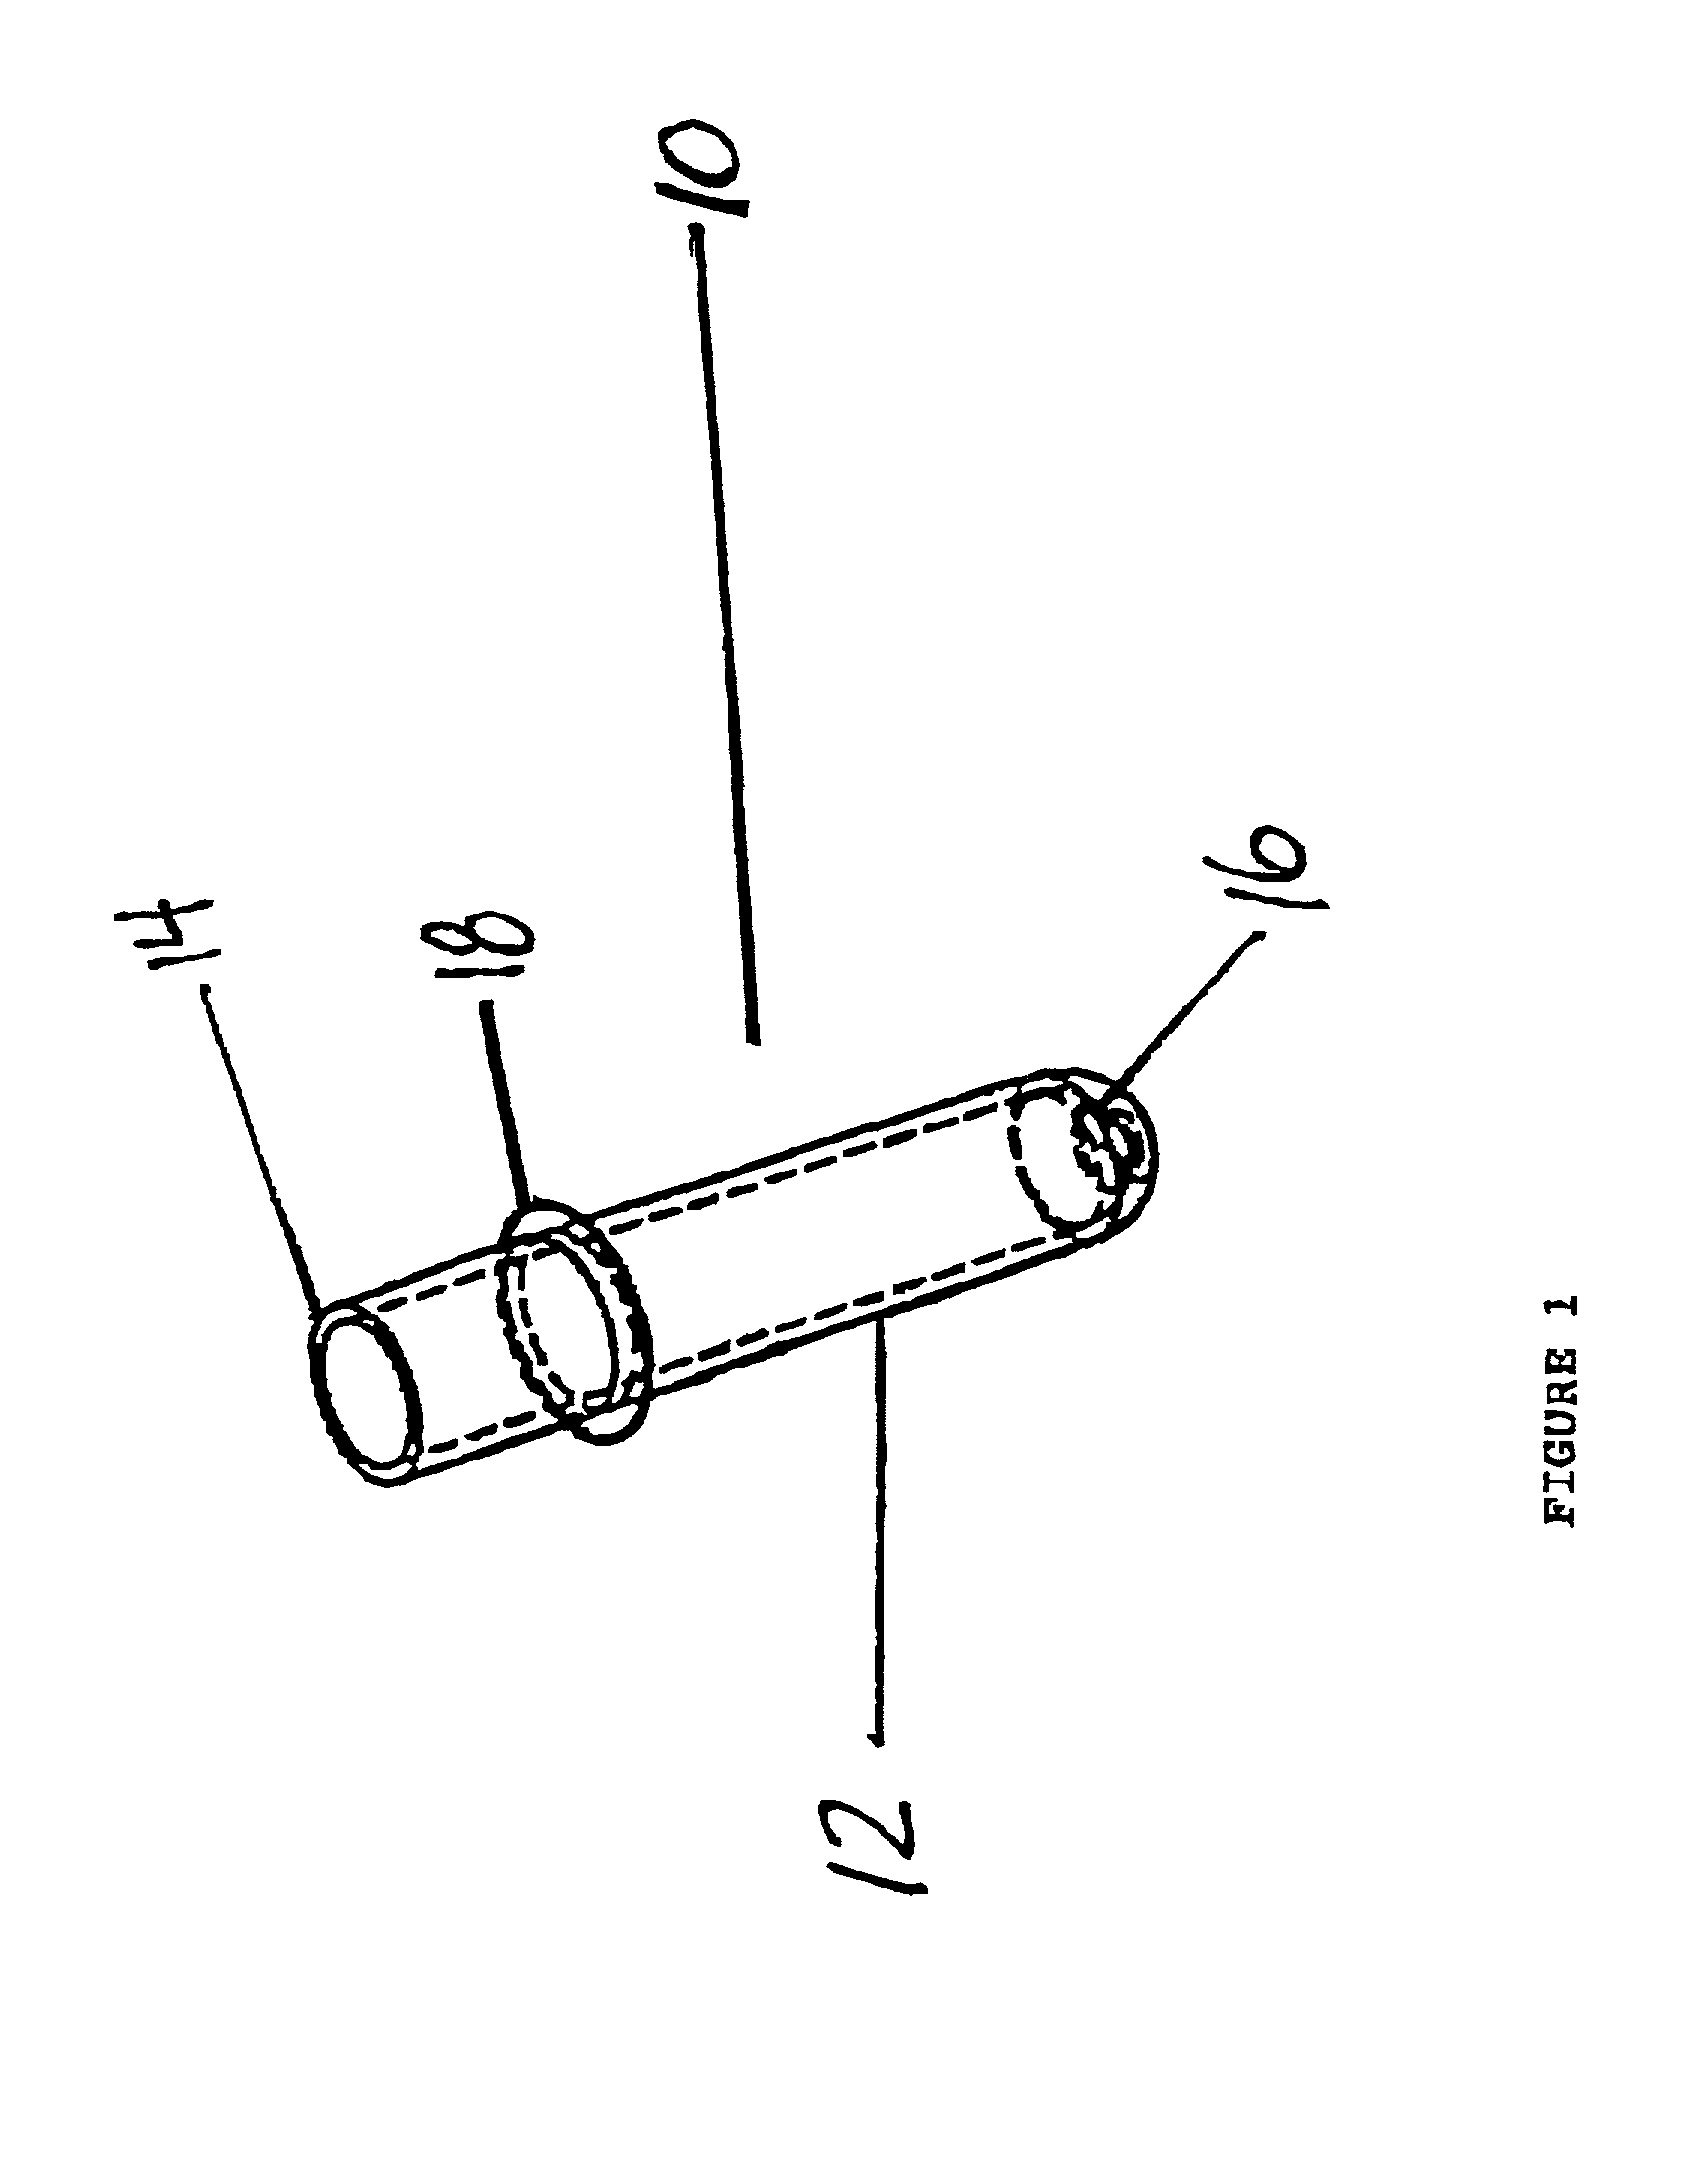 Method and system for picking and placing vessels